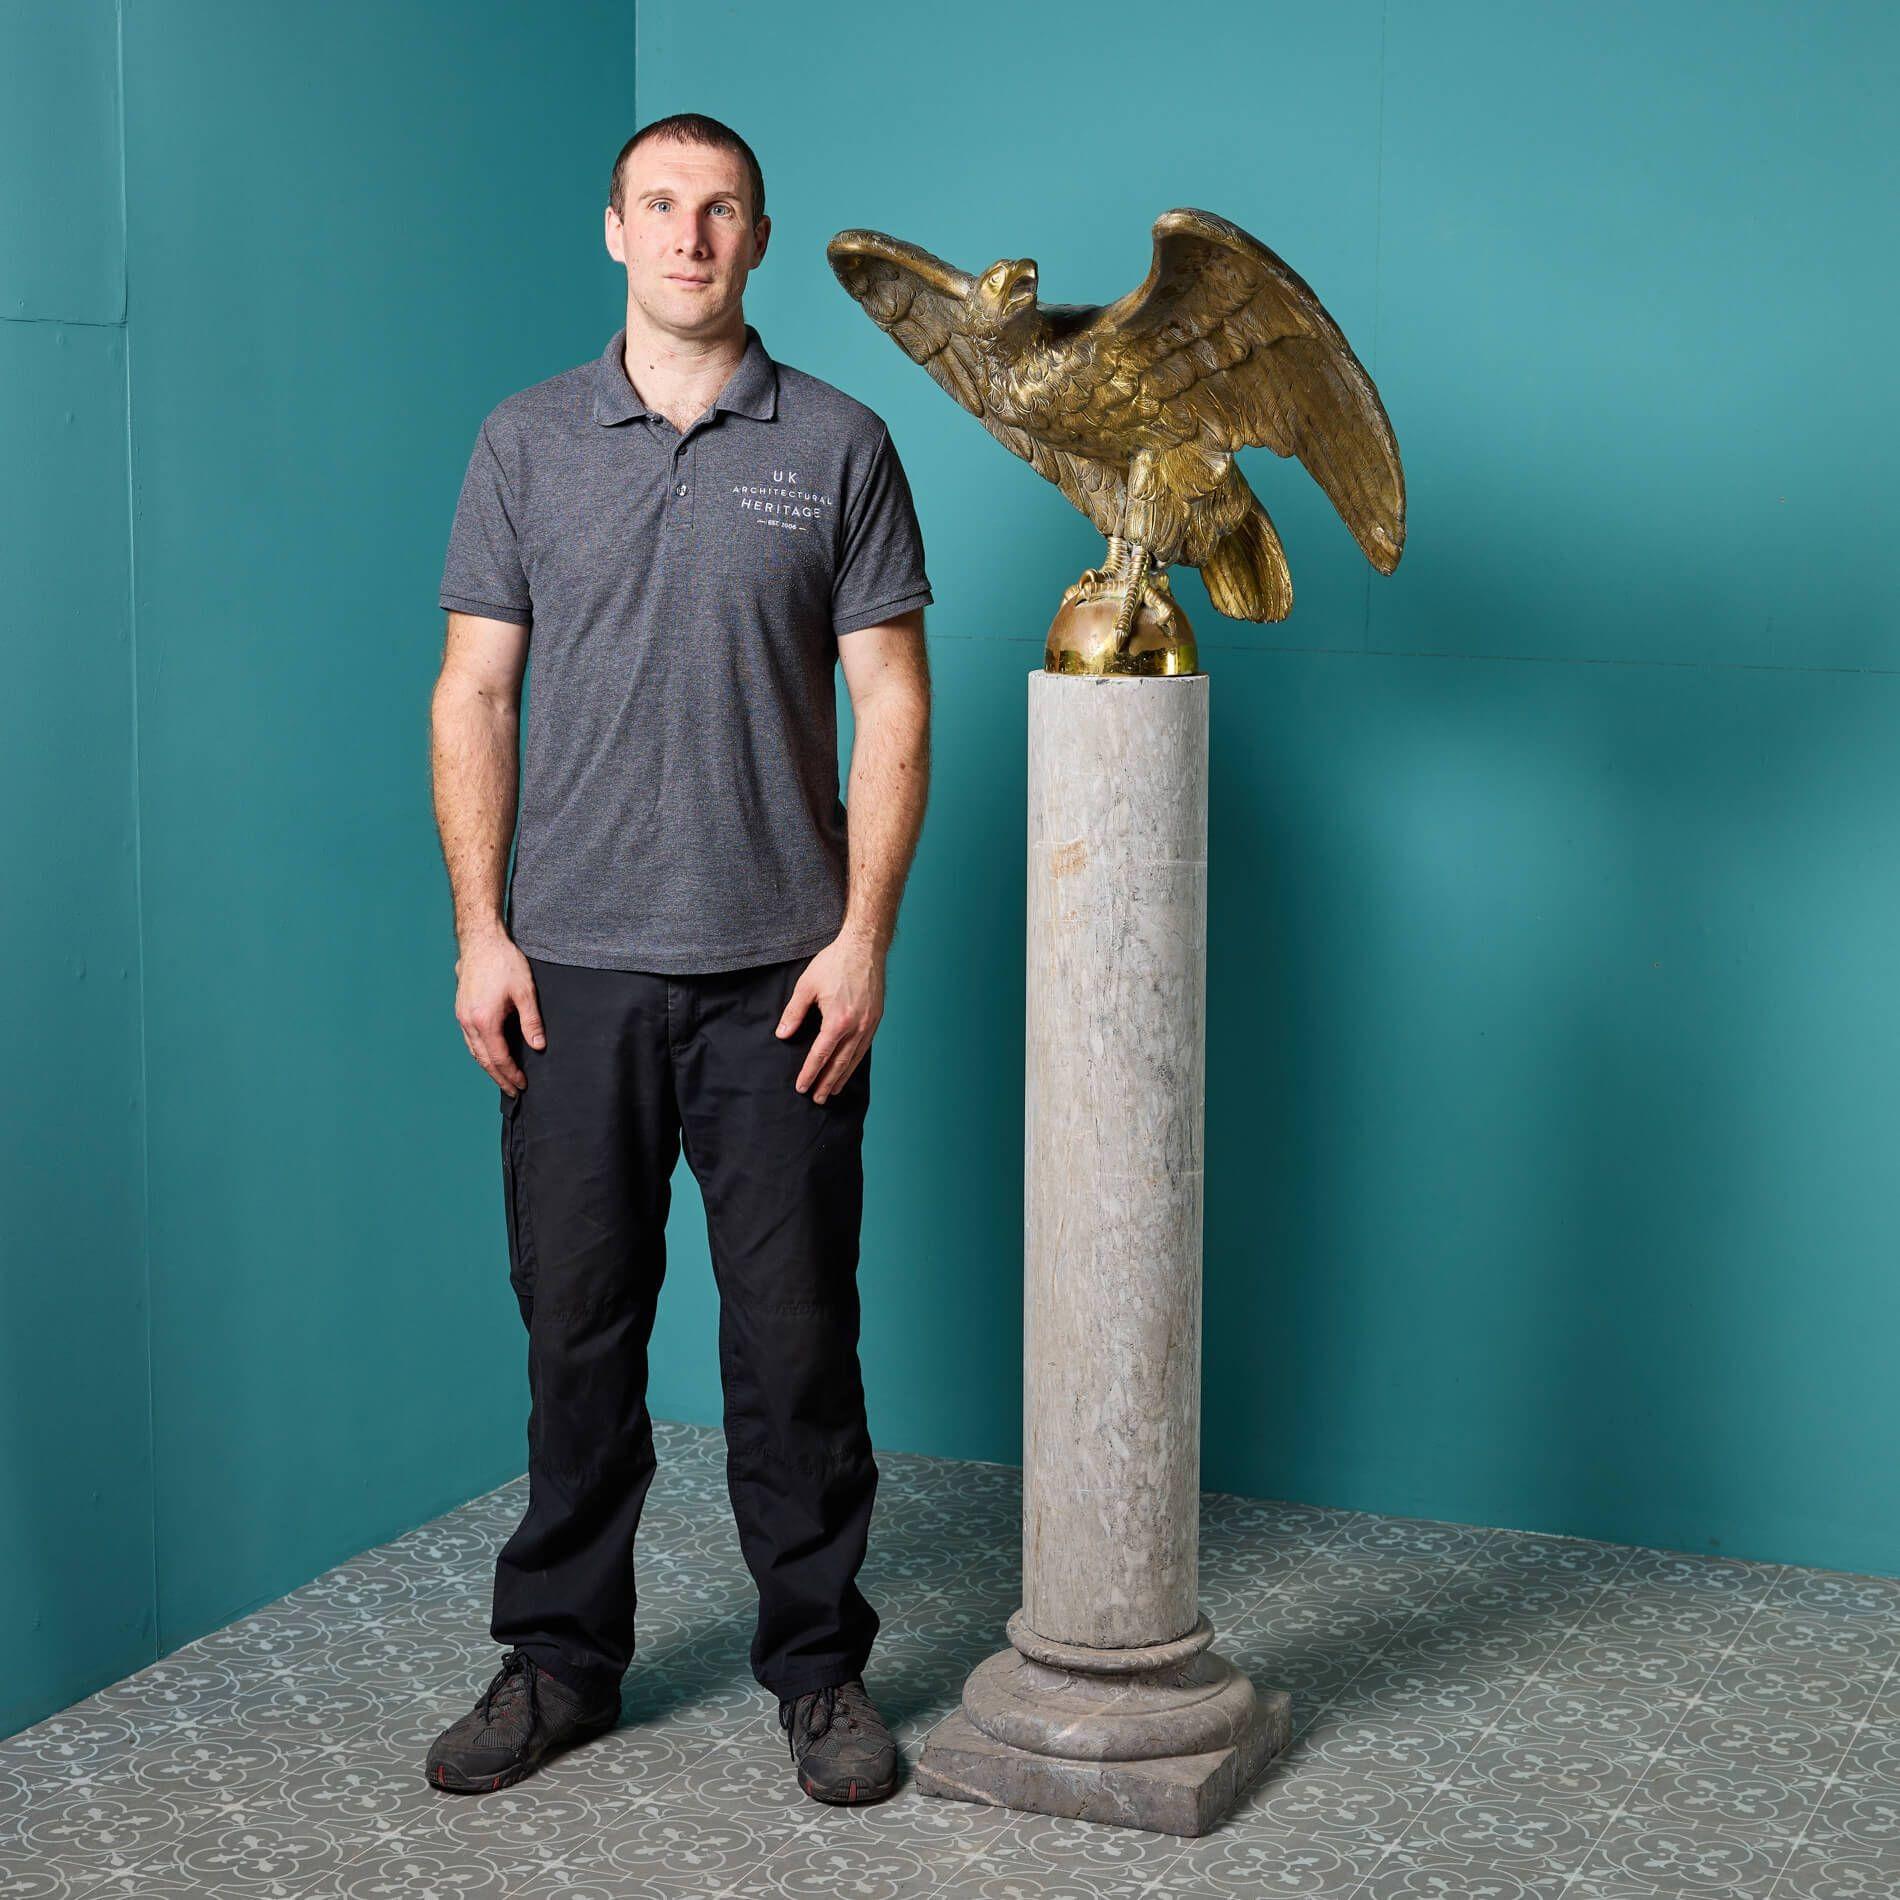 An impressive 19th century solid gilt brass eagle statue upon a grey Ashburton marble column. This striking figurine is an imposing piece, best situated to a spacious interior alcove, hallway or drawing room so that its beauty can be observed from